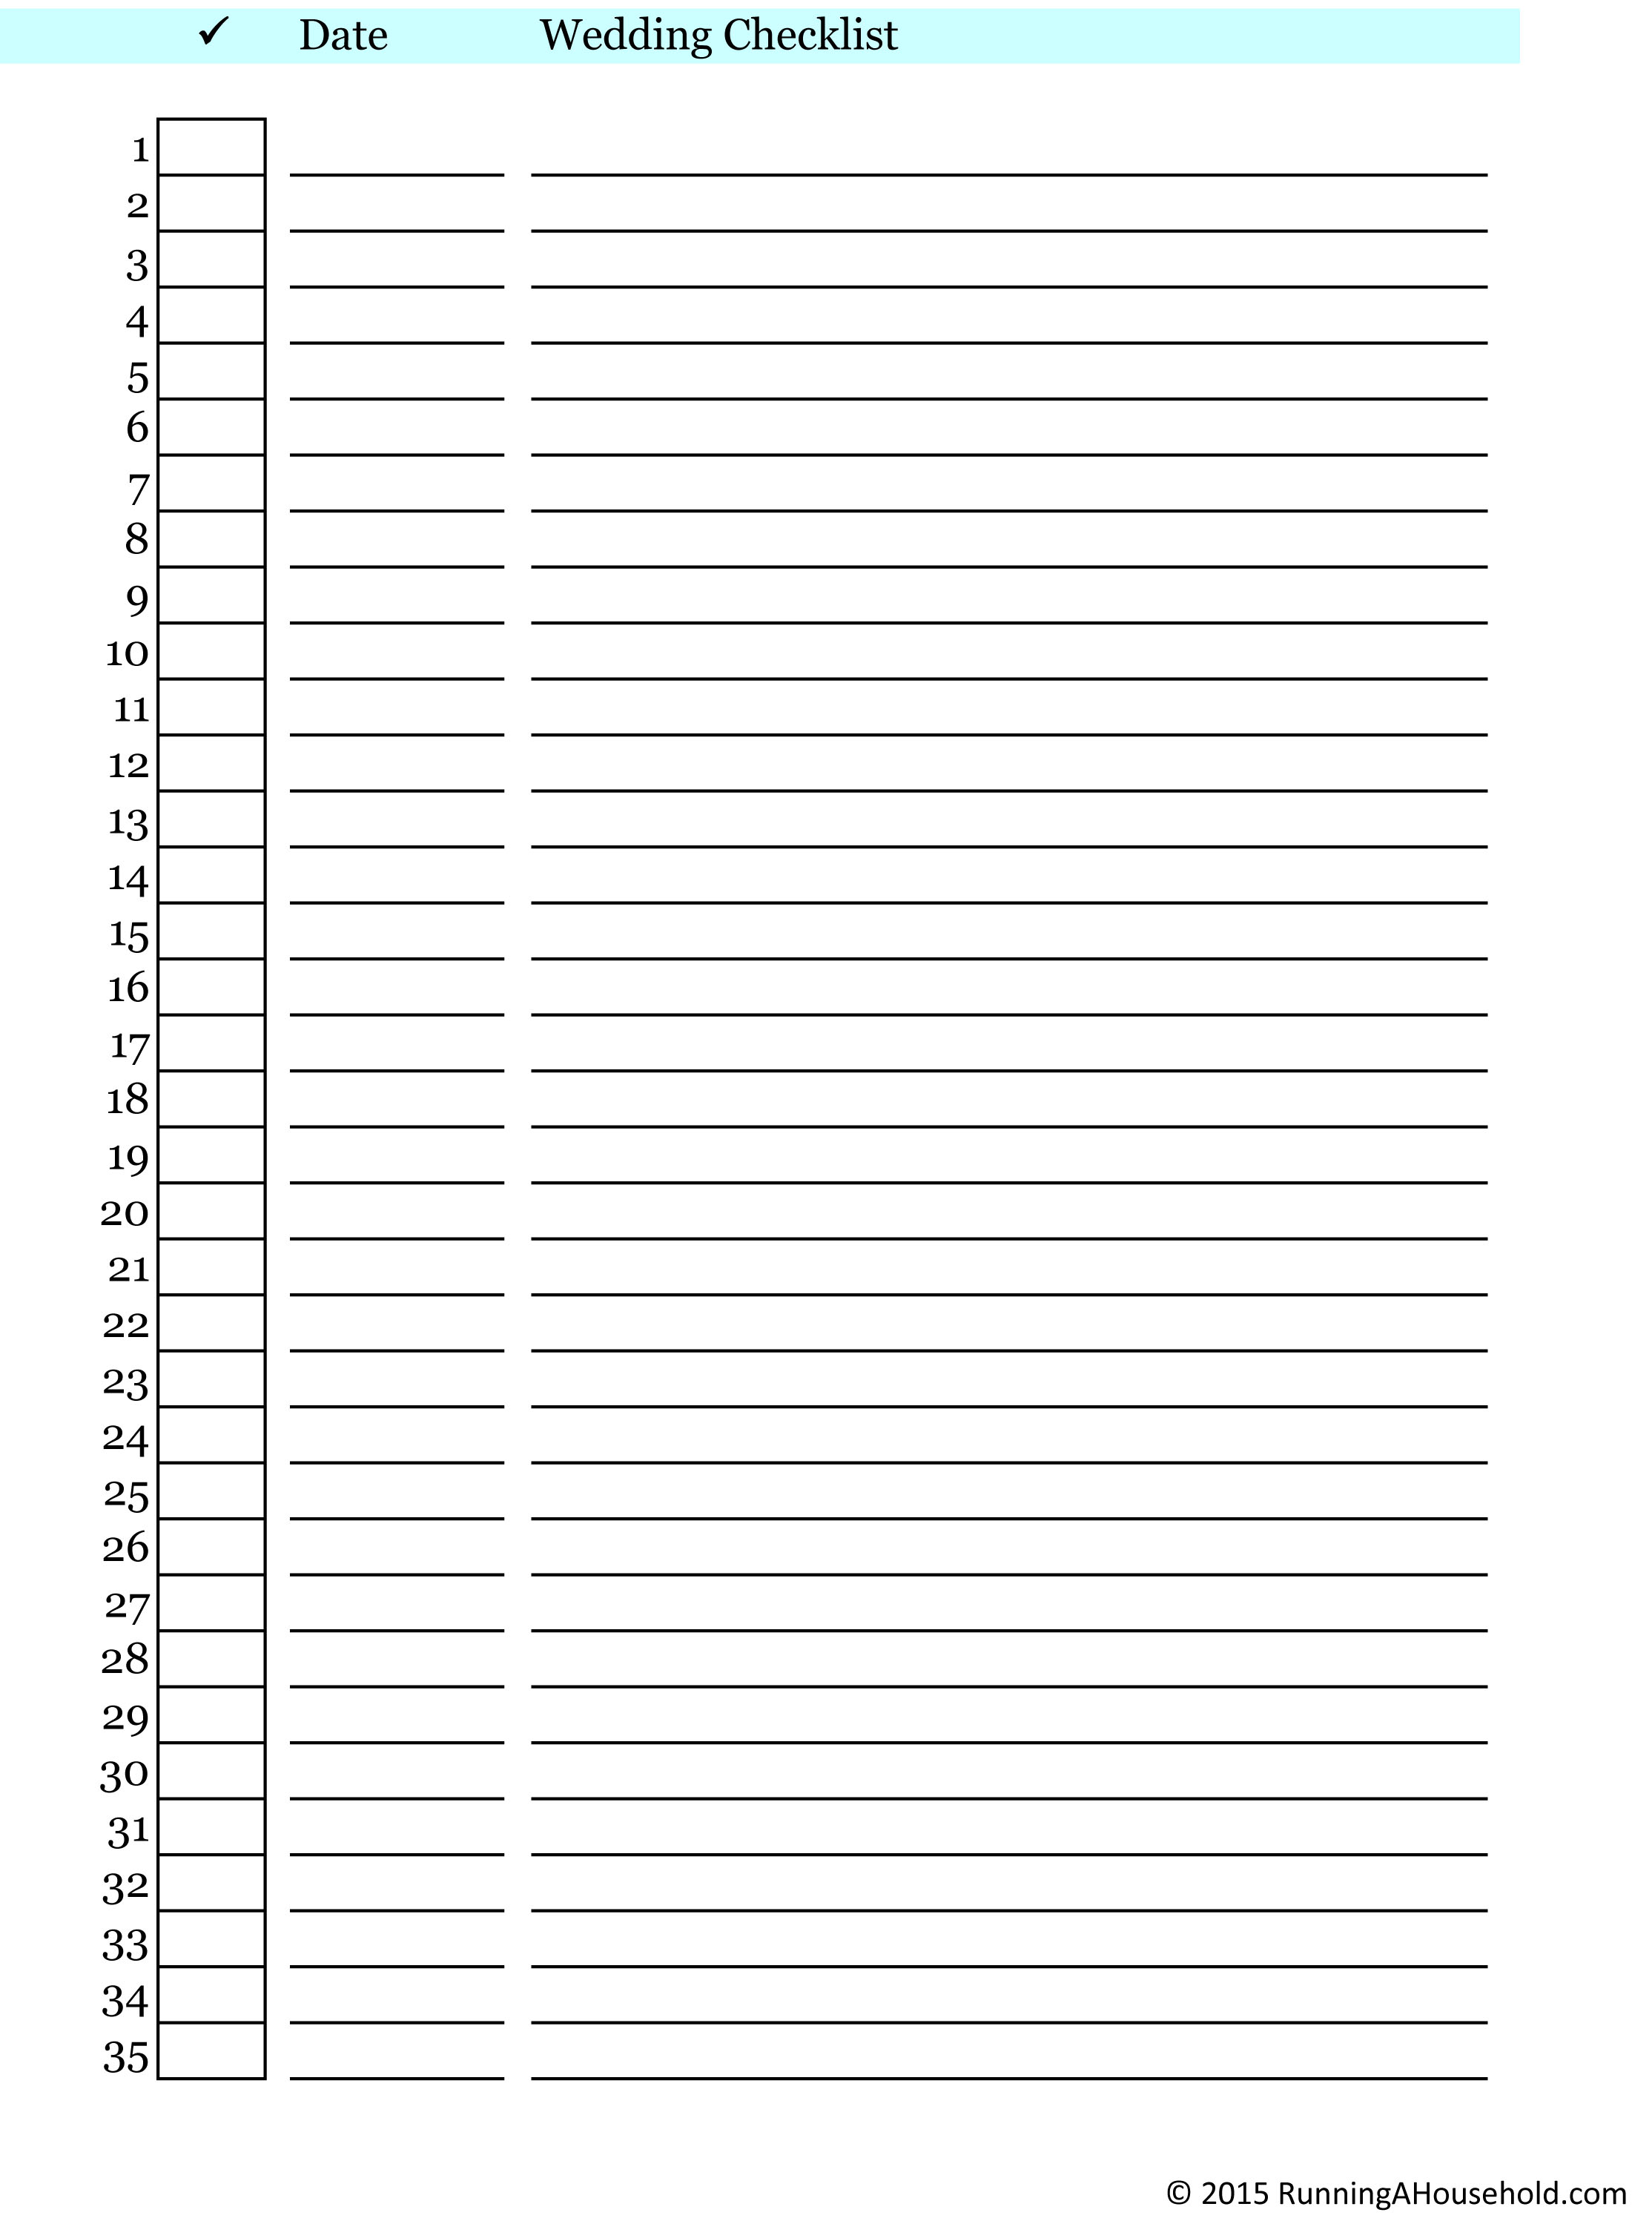 Blank Printable Wedding Checklist Archives Running A Household 